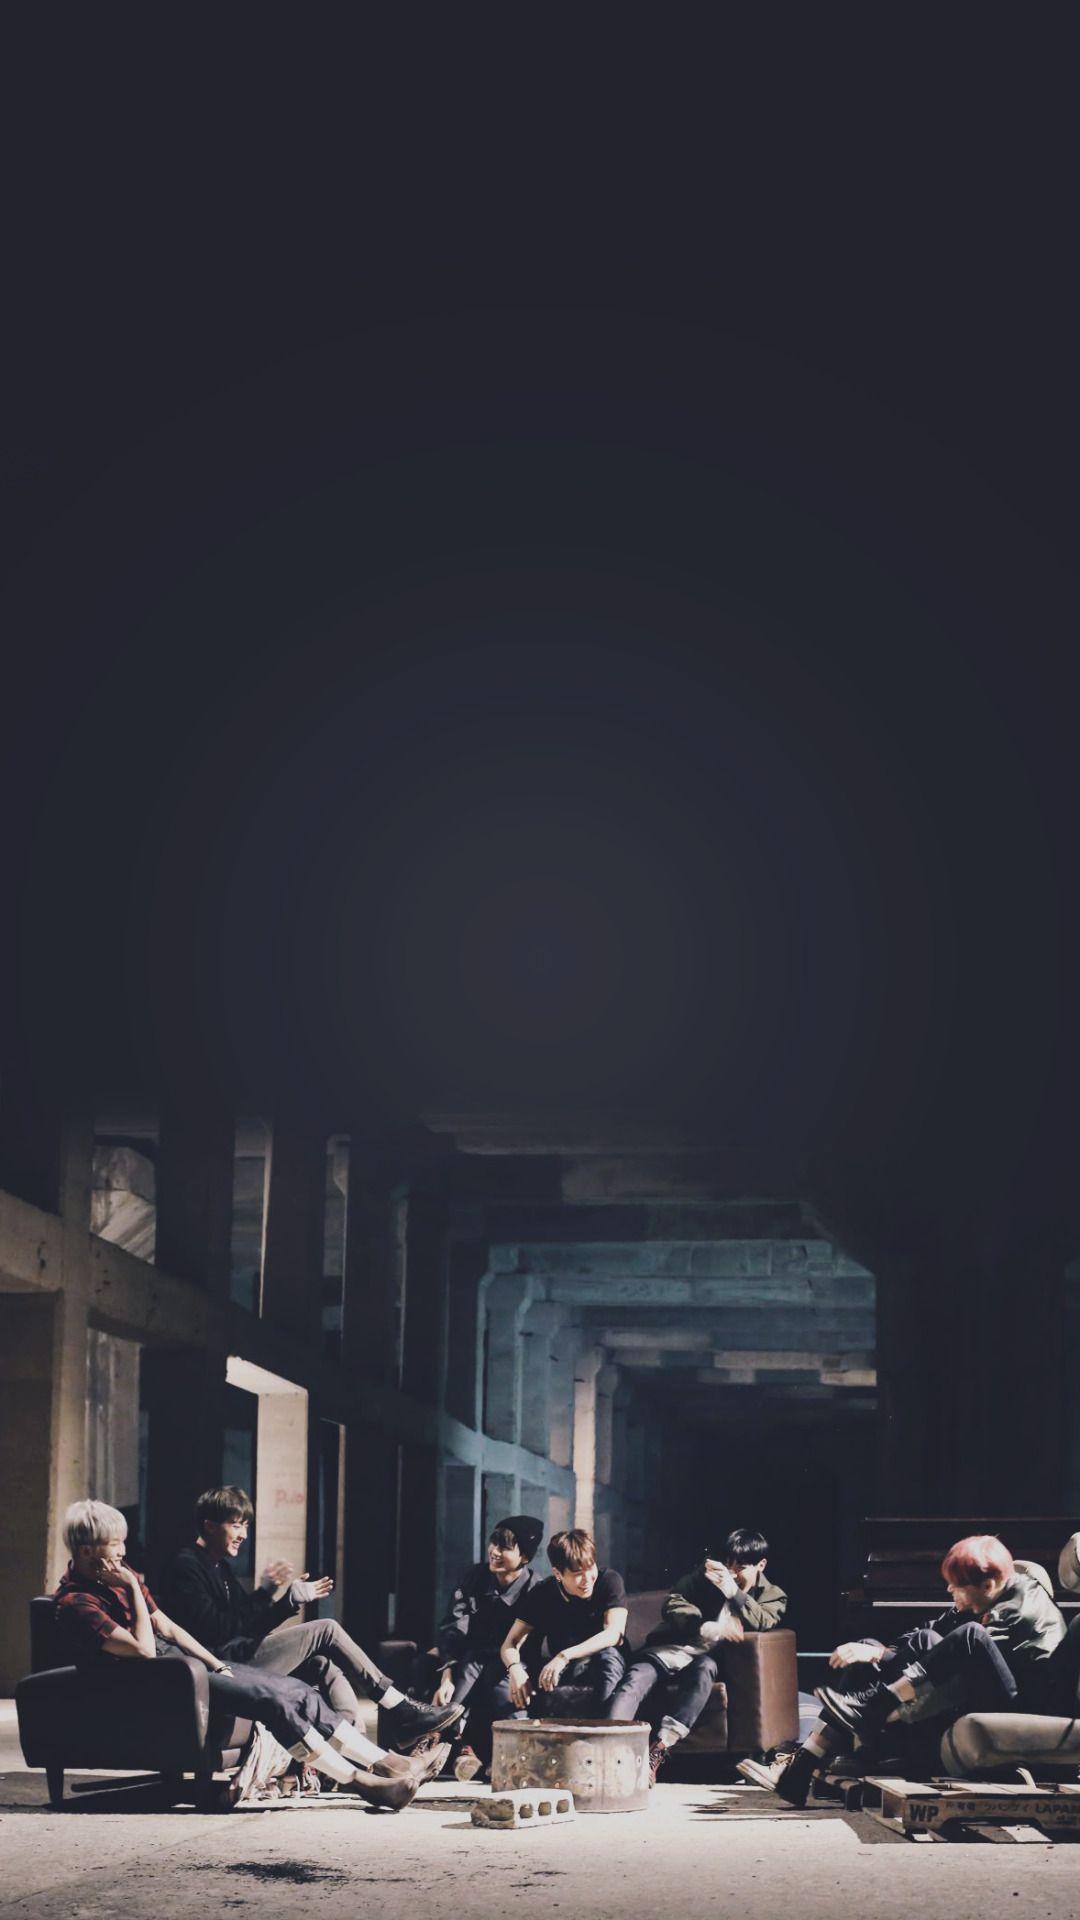 BTS Aesthetic Wallpapers - Wallpaper Cave